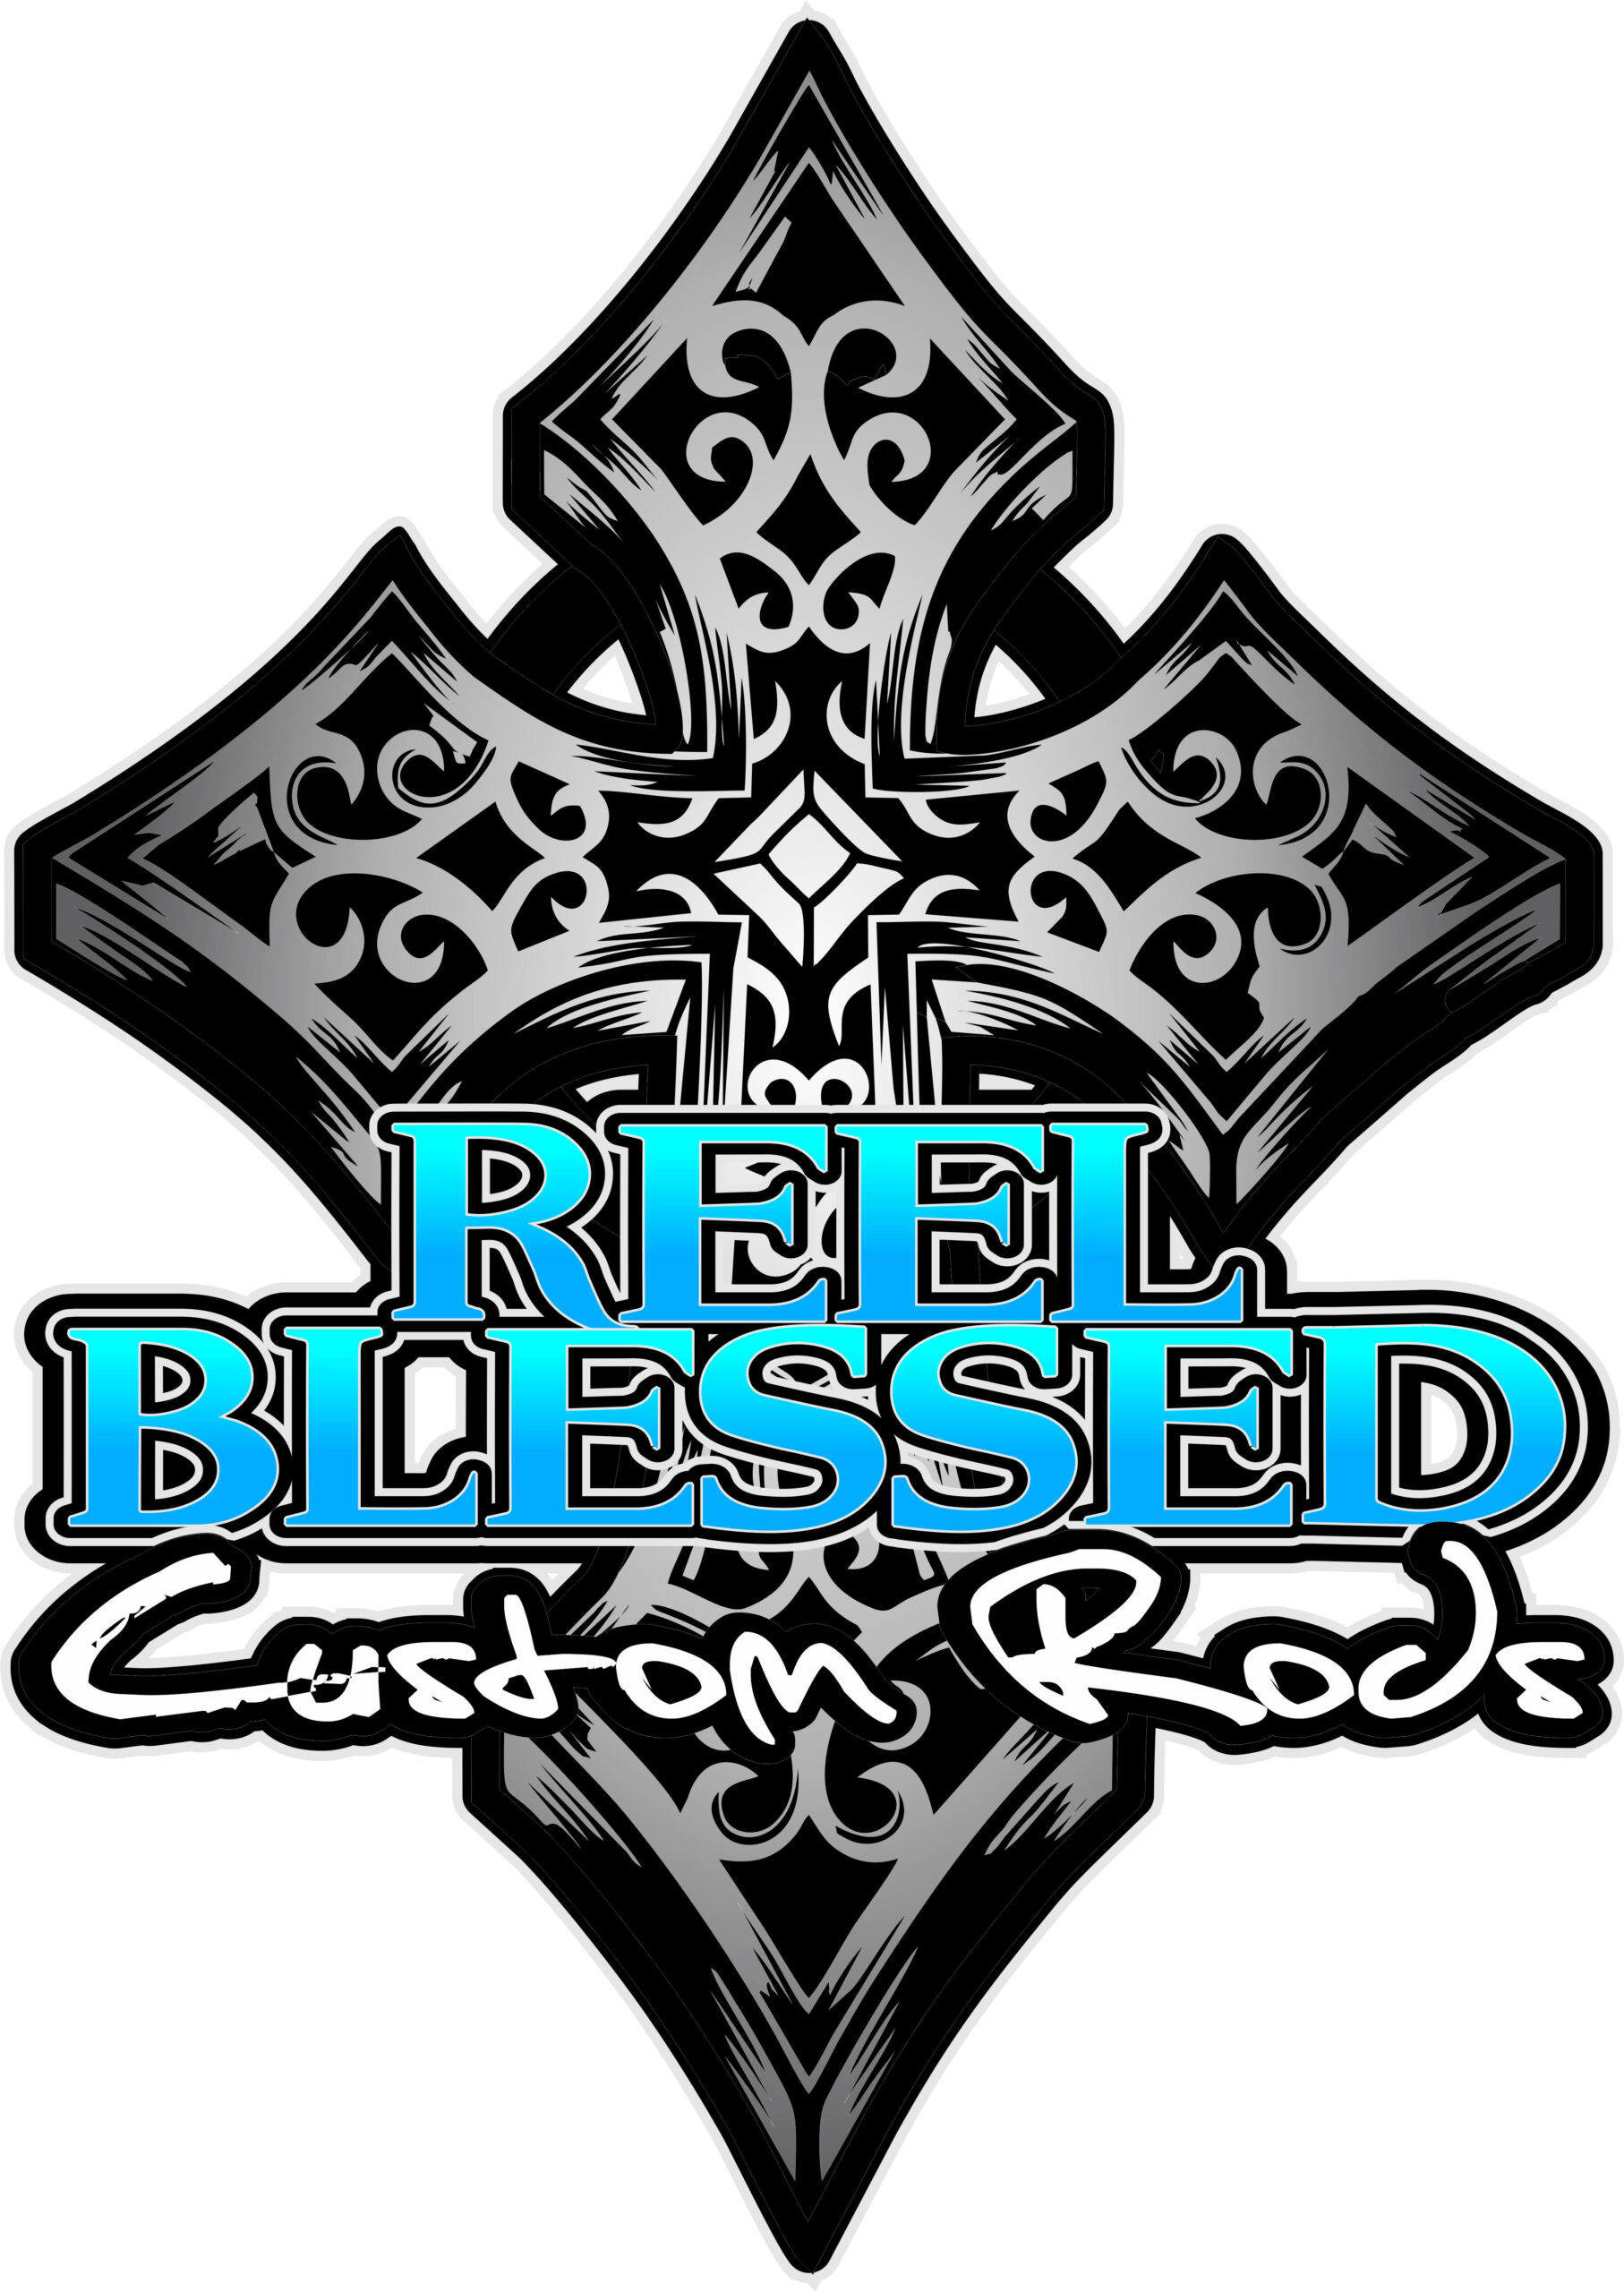 Reed Blessed Customs